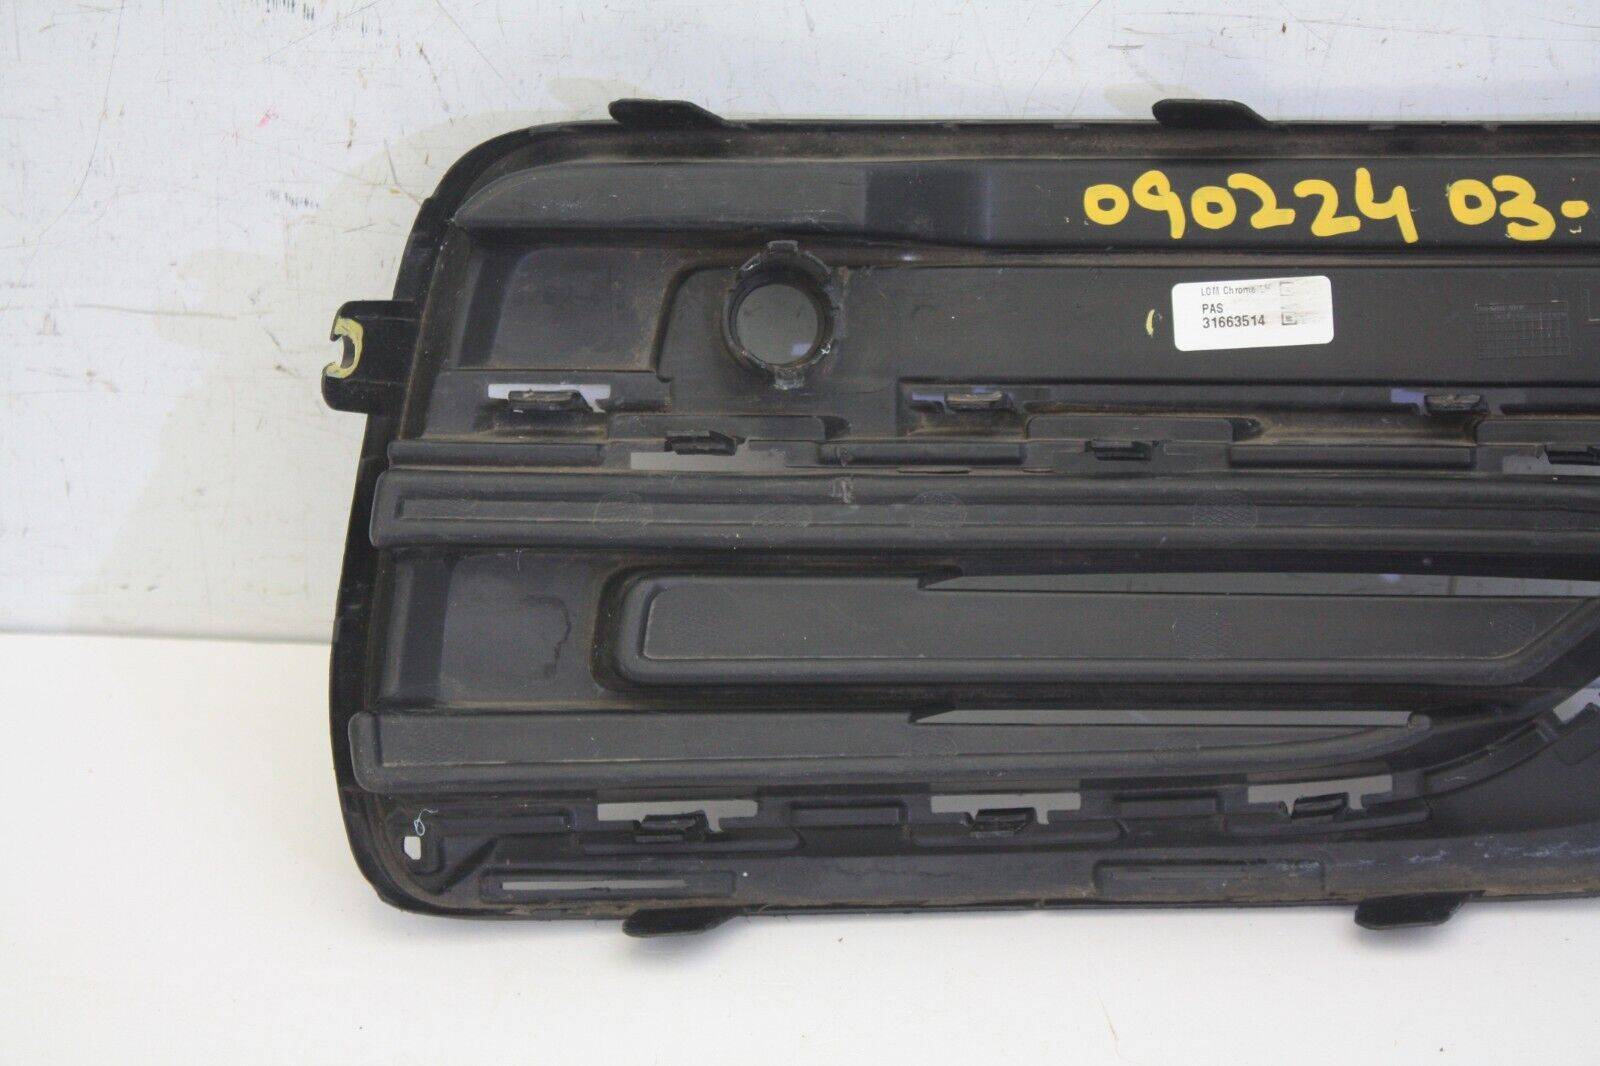 Volvo-XC90-Front-Bumper-Left-Side-Lower-Grill-31663514-Genuine-176232057764-13